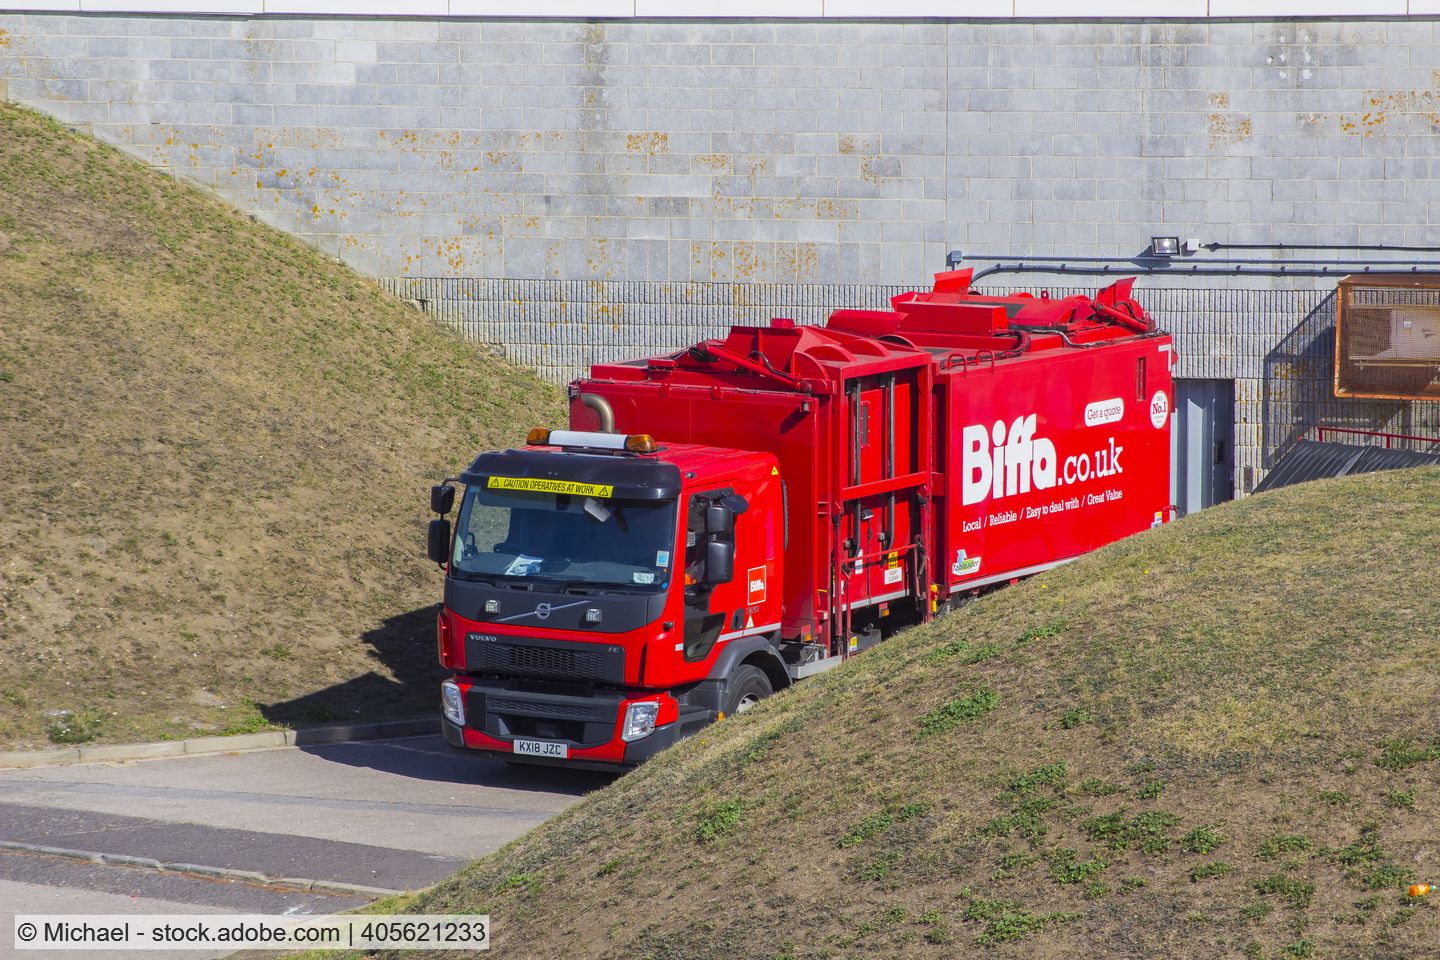 Waste lorry in red Biffa livery